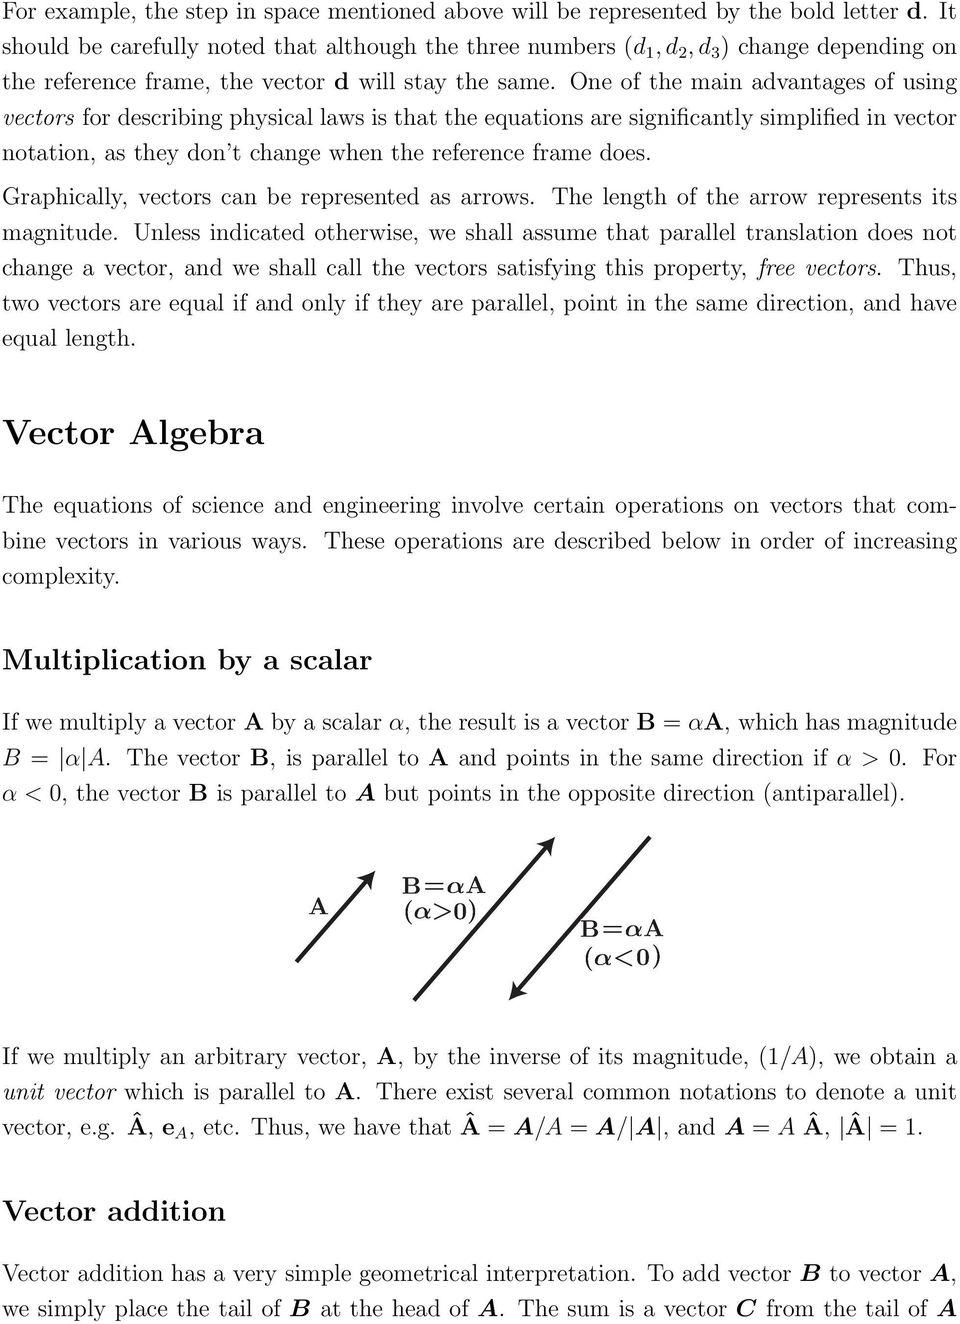 One of the main advantages of using vectors for describing physical laws is that the equations are significantly simplified in vector notation, as they don t change when the reference frame does.